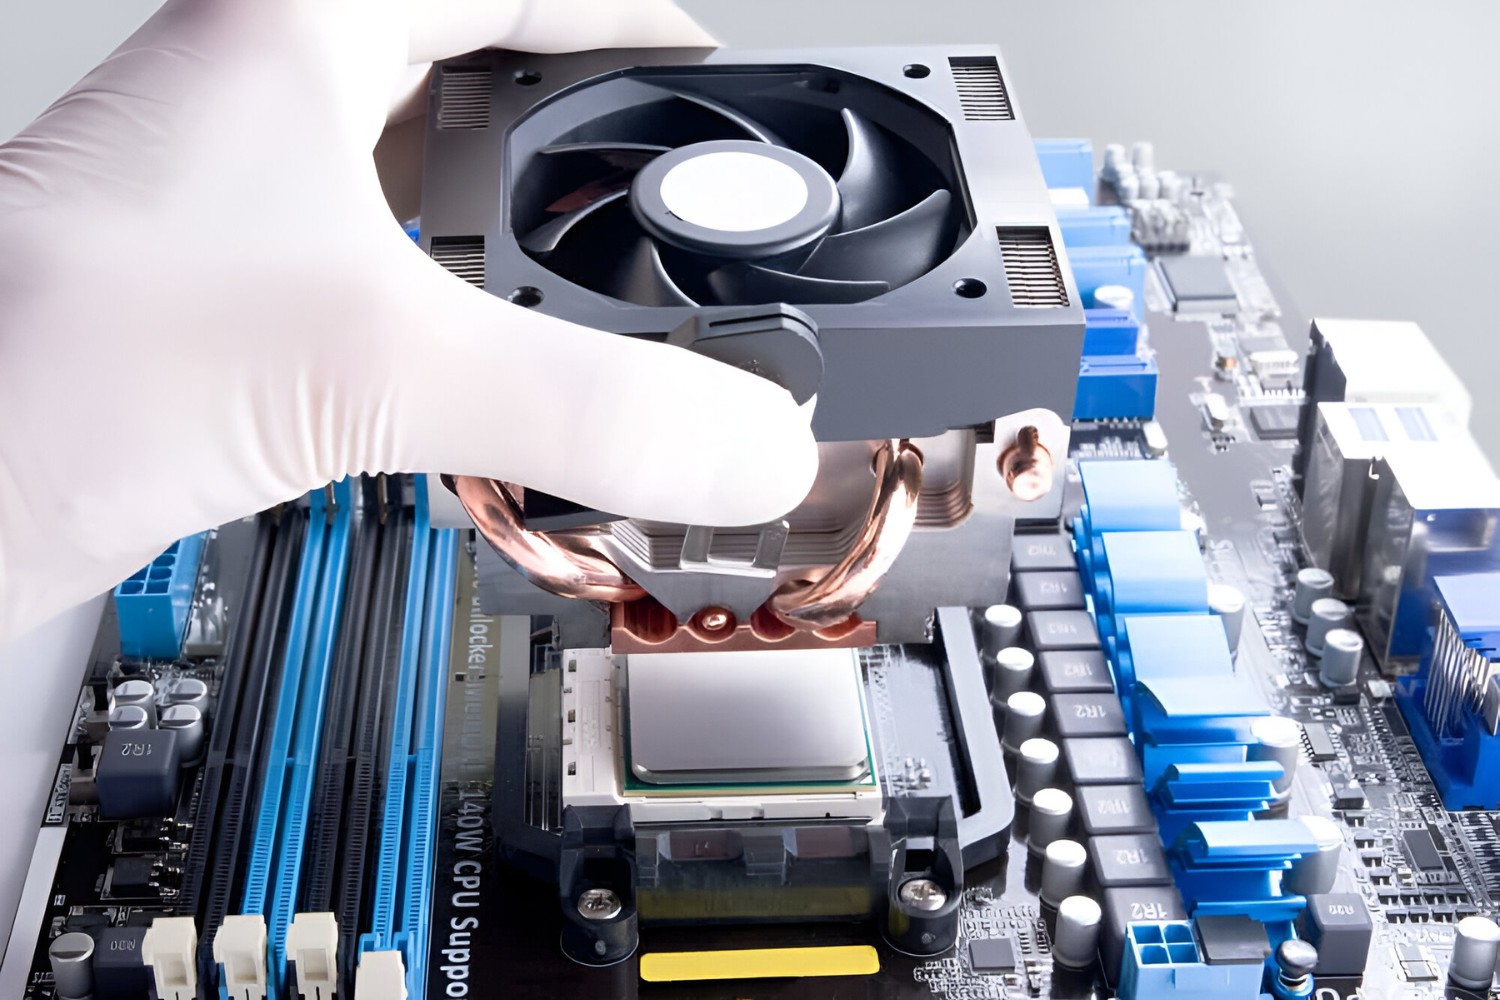 How To Attach Fan To CPU Cooler